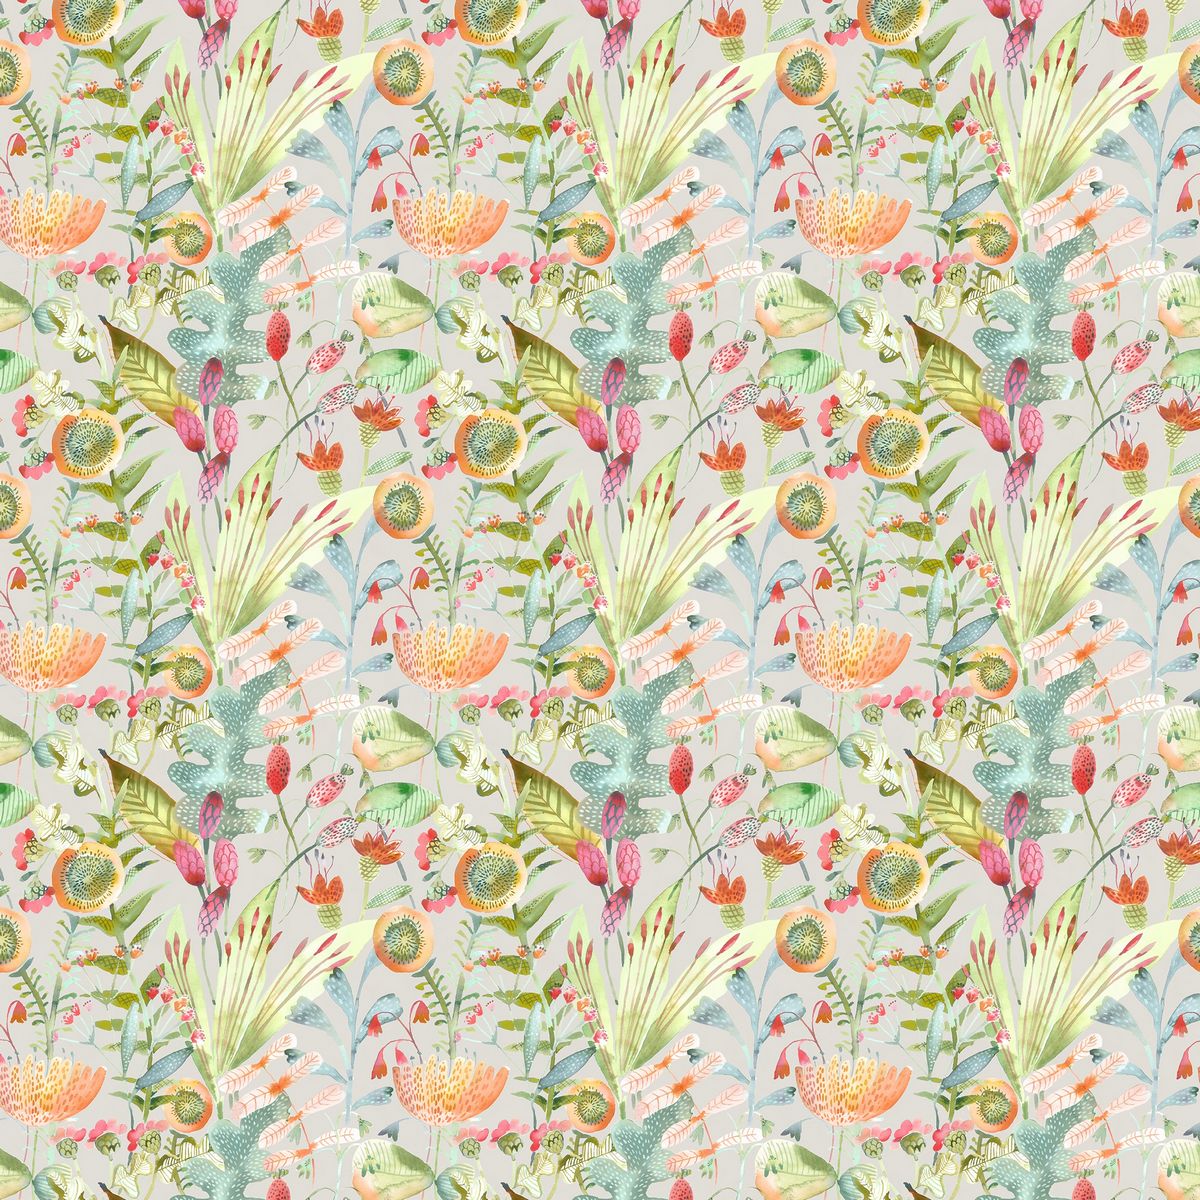 June Blossom Harvest Fabric by Voyage Maison